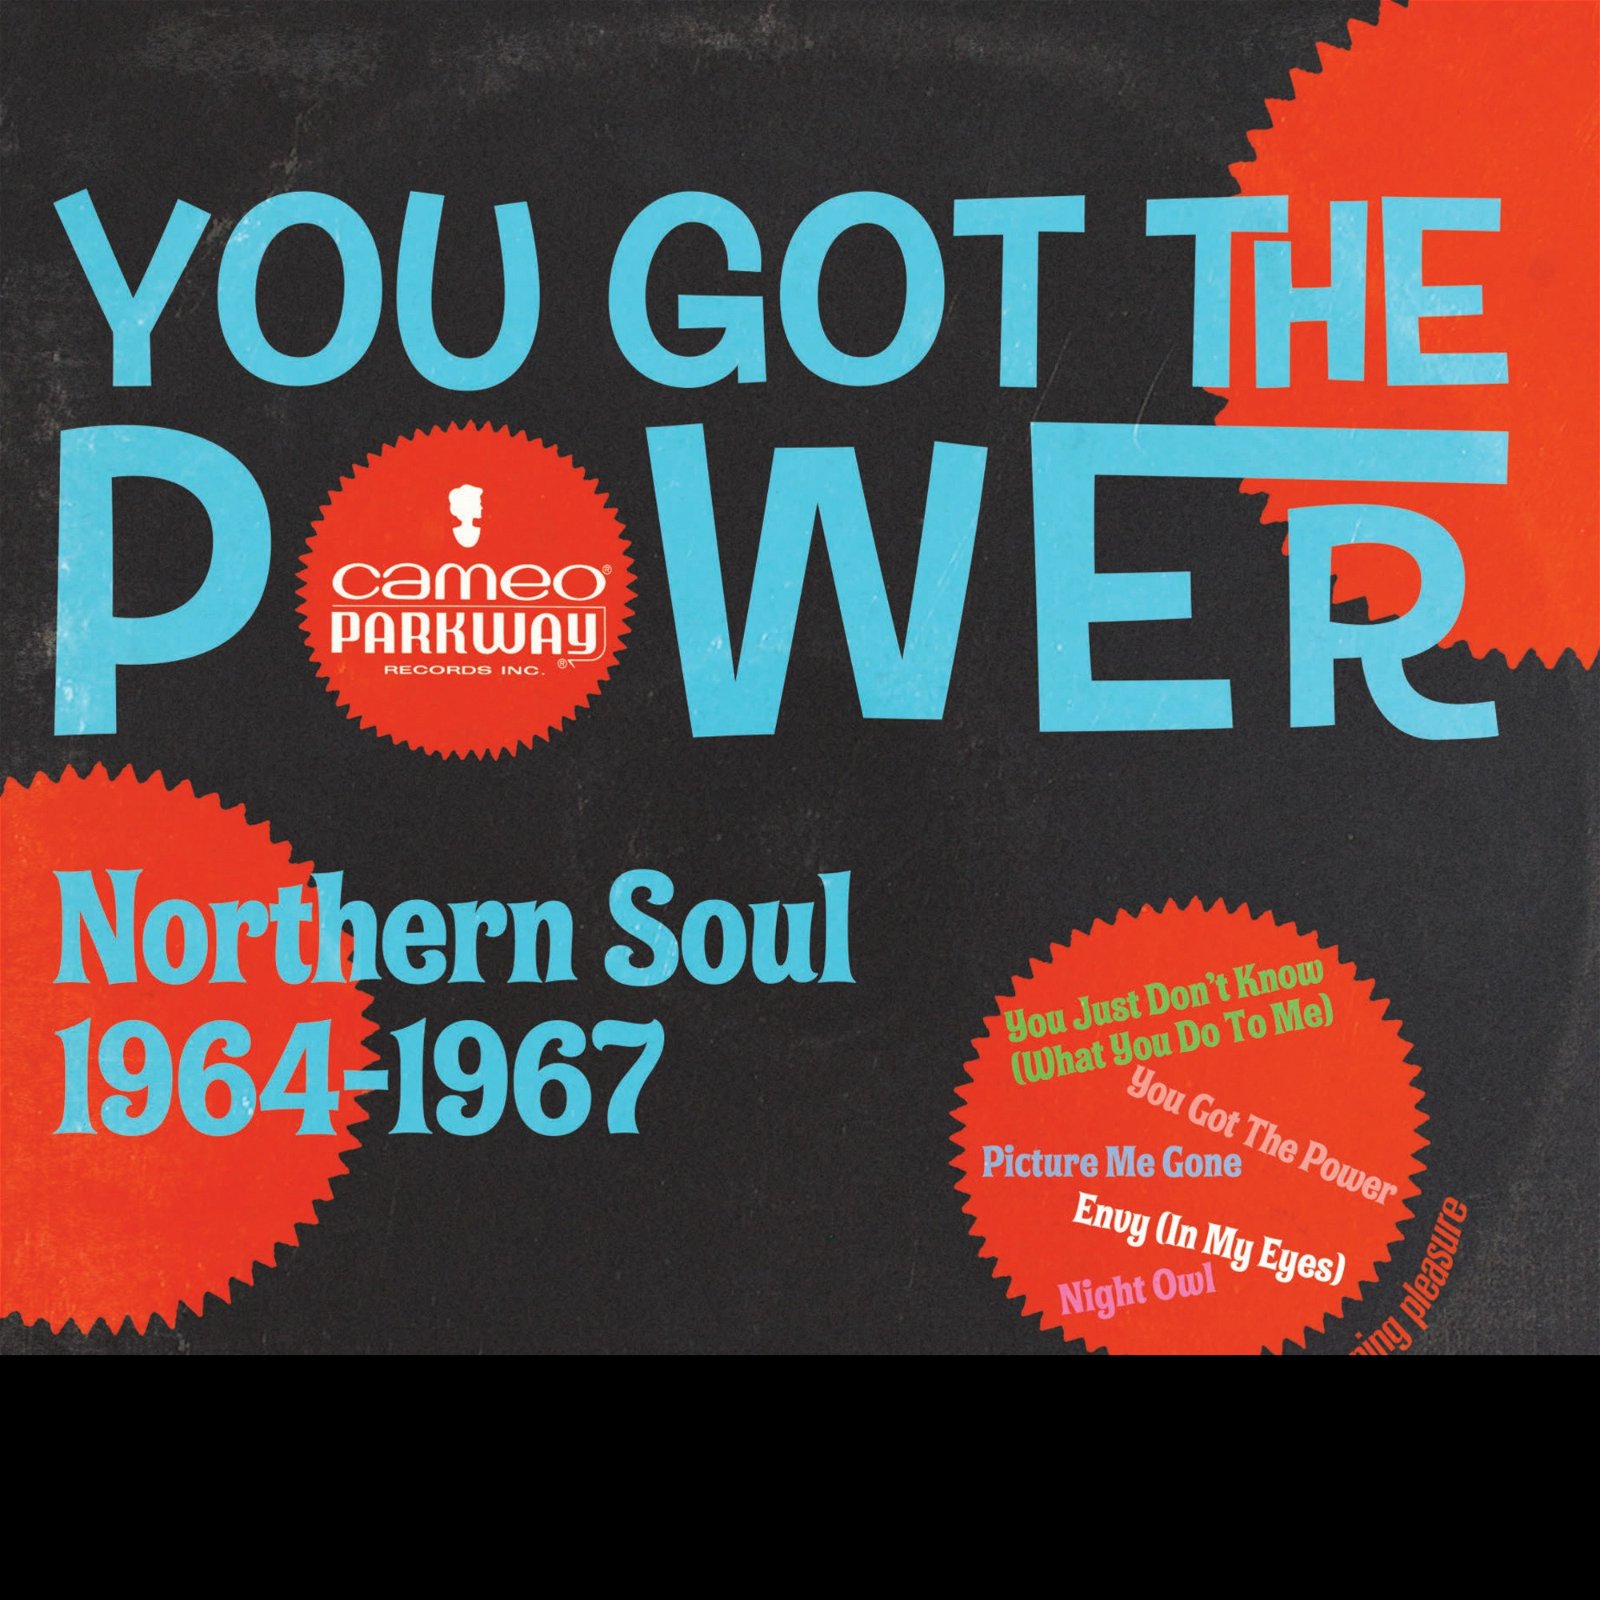 CD Shop - V/A YOU GOT THE POWER: CAMEO PARKWAY NORTHERN SOUL (1964-1967)